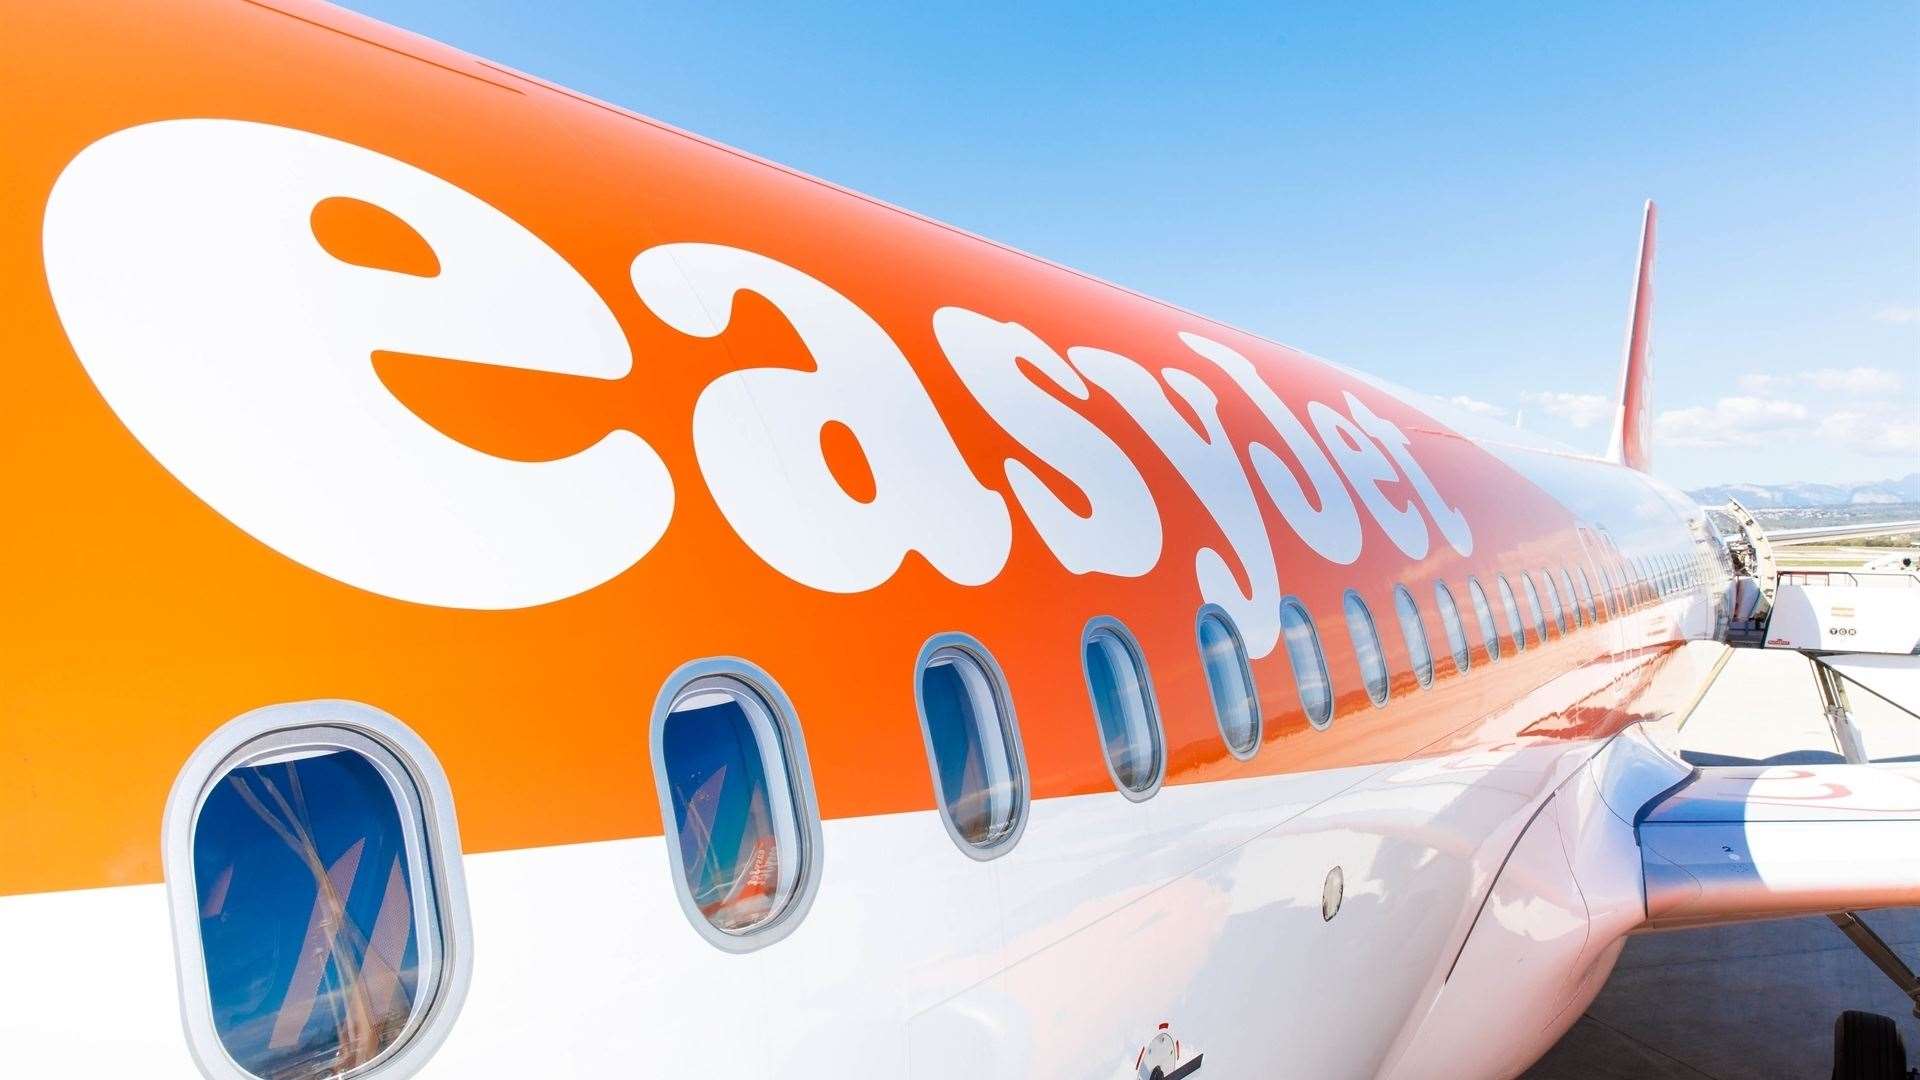 Mr Spittal's flight was one of an estimated 1700 EasyJet has cancelled